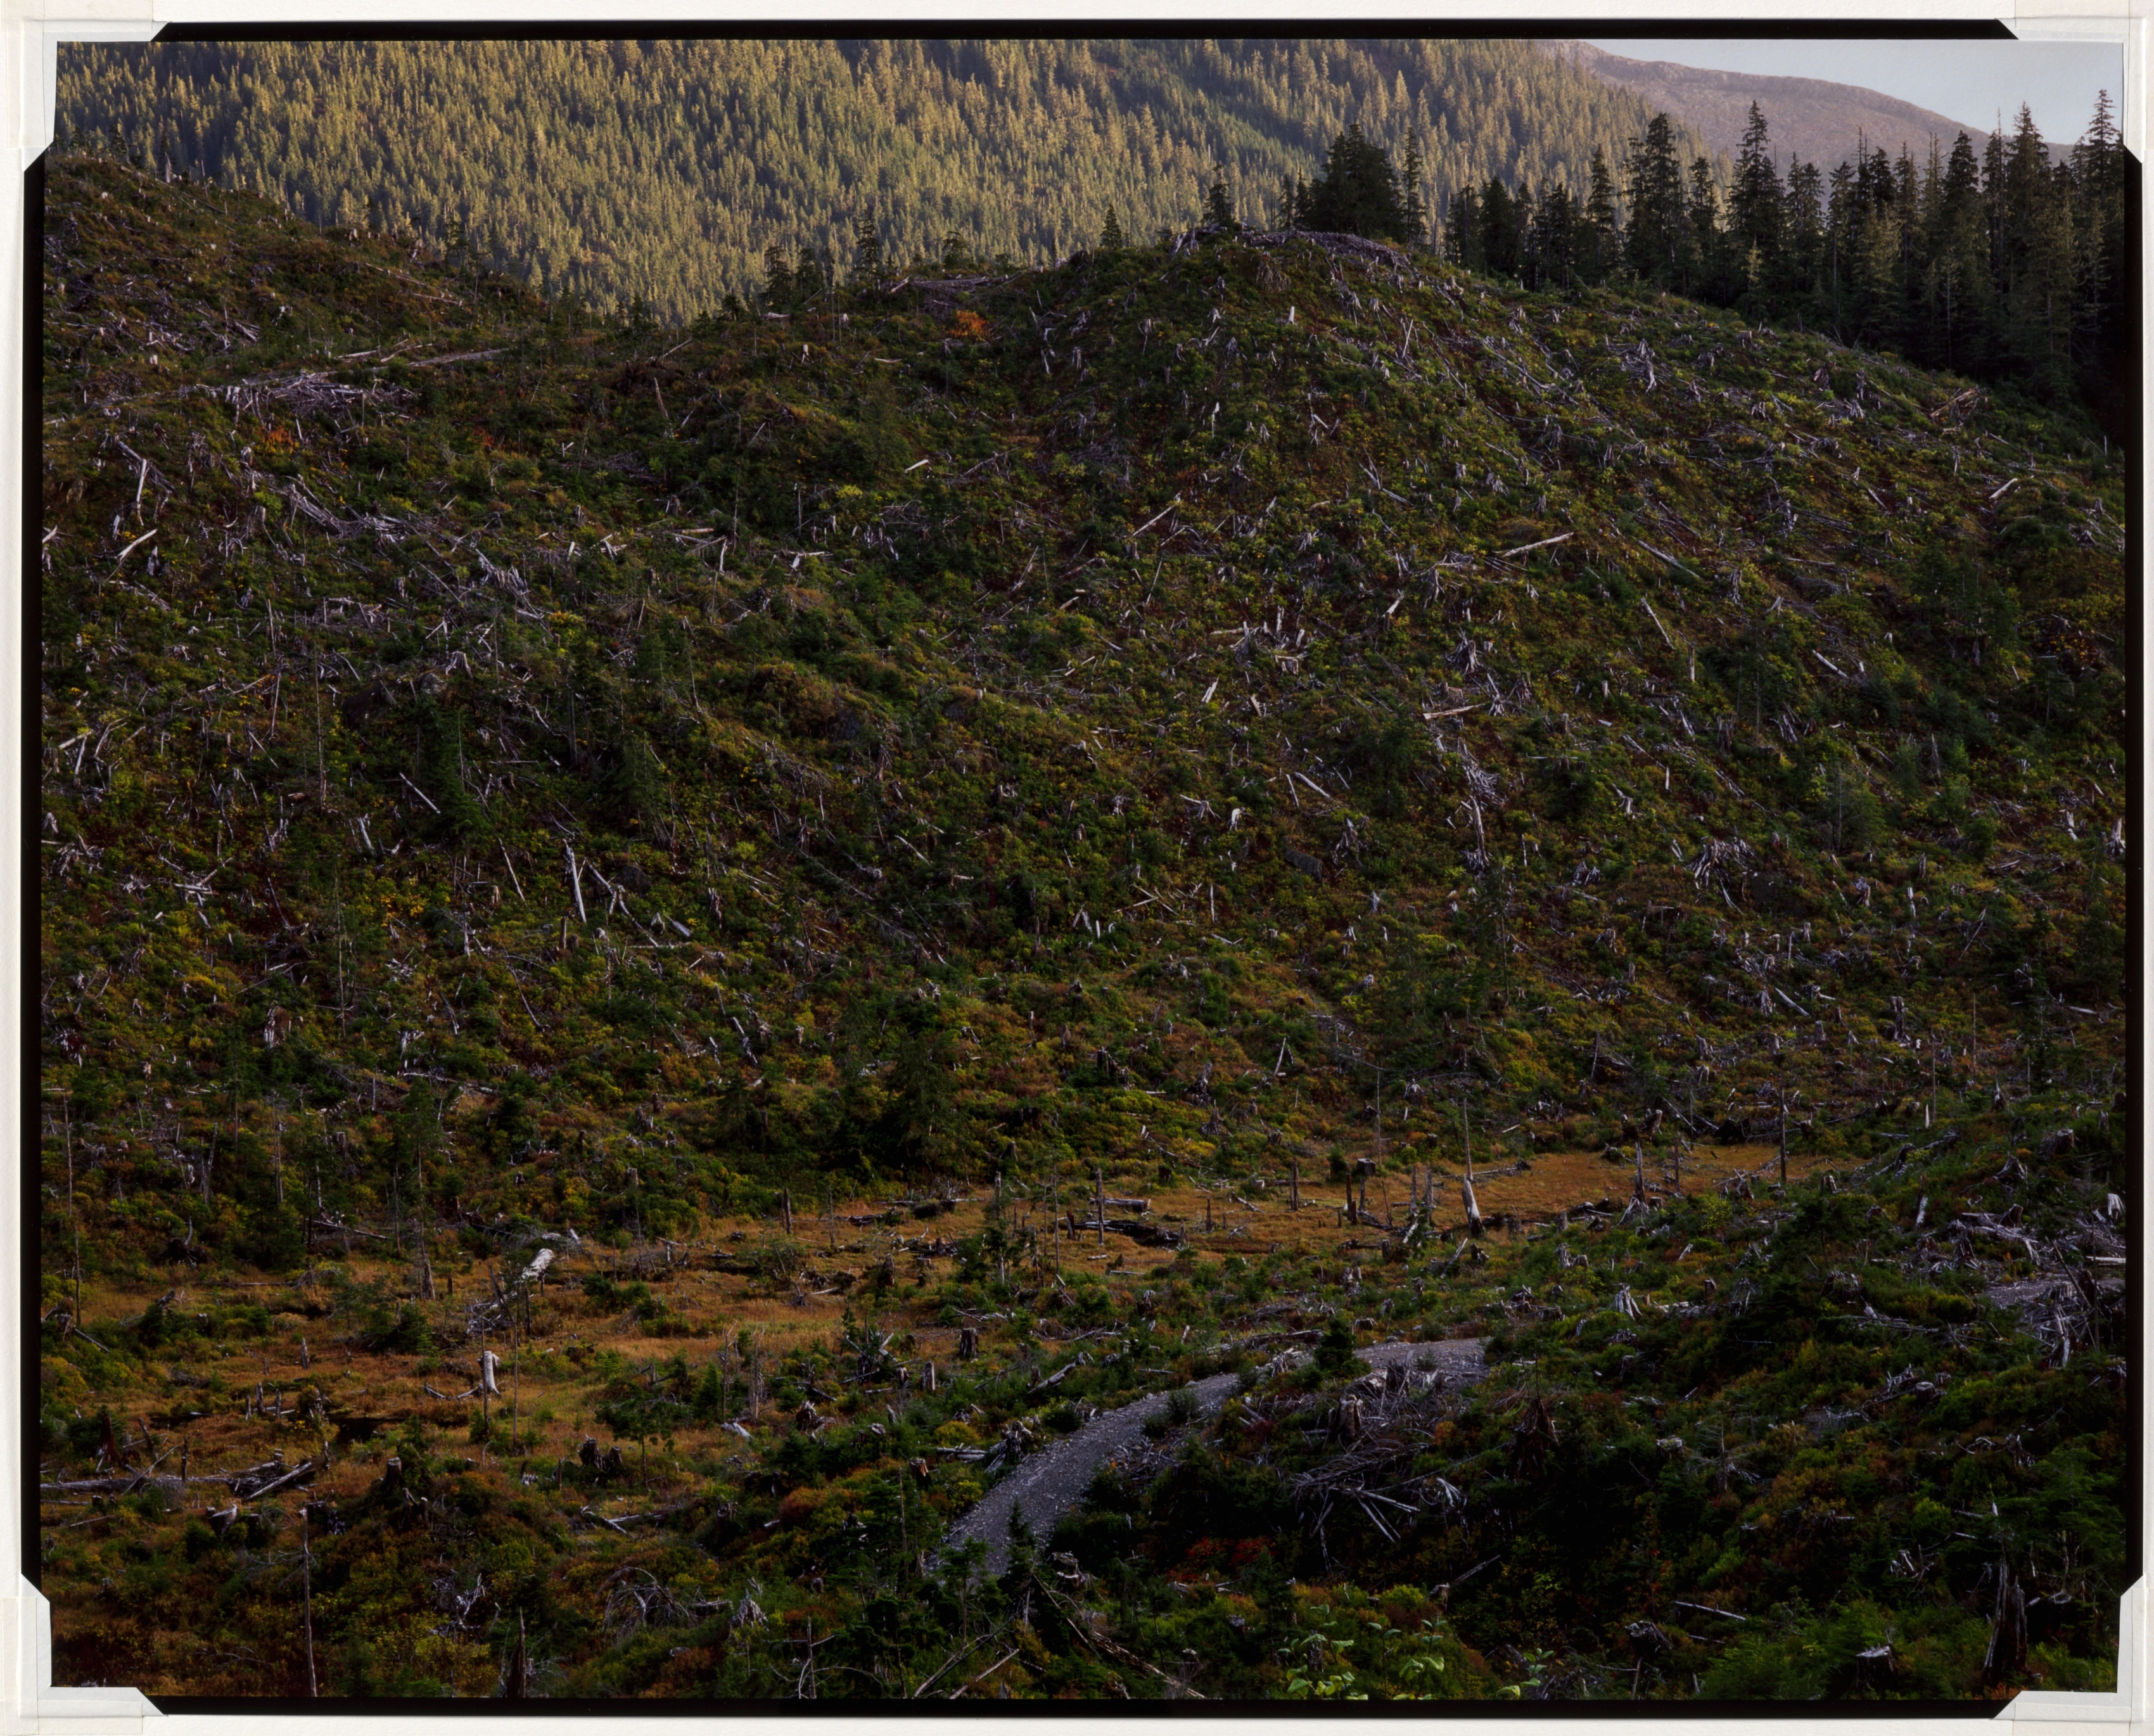 "I Like the Look of a Clear-Cut"--Attributed to a Forest Supervisor at a Public Meeting